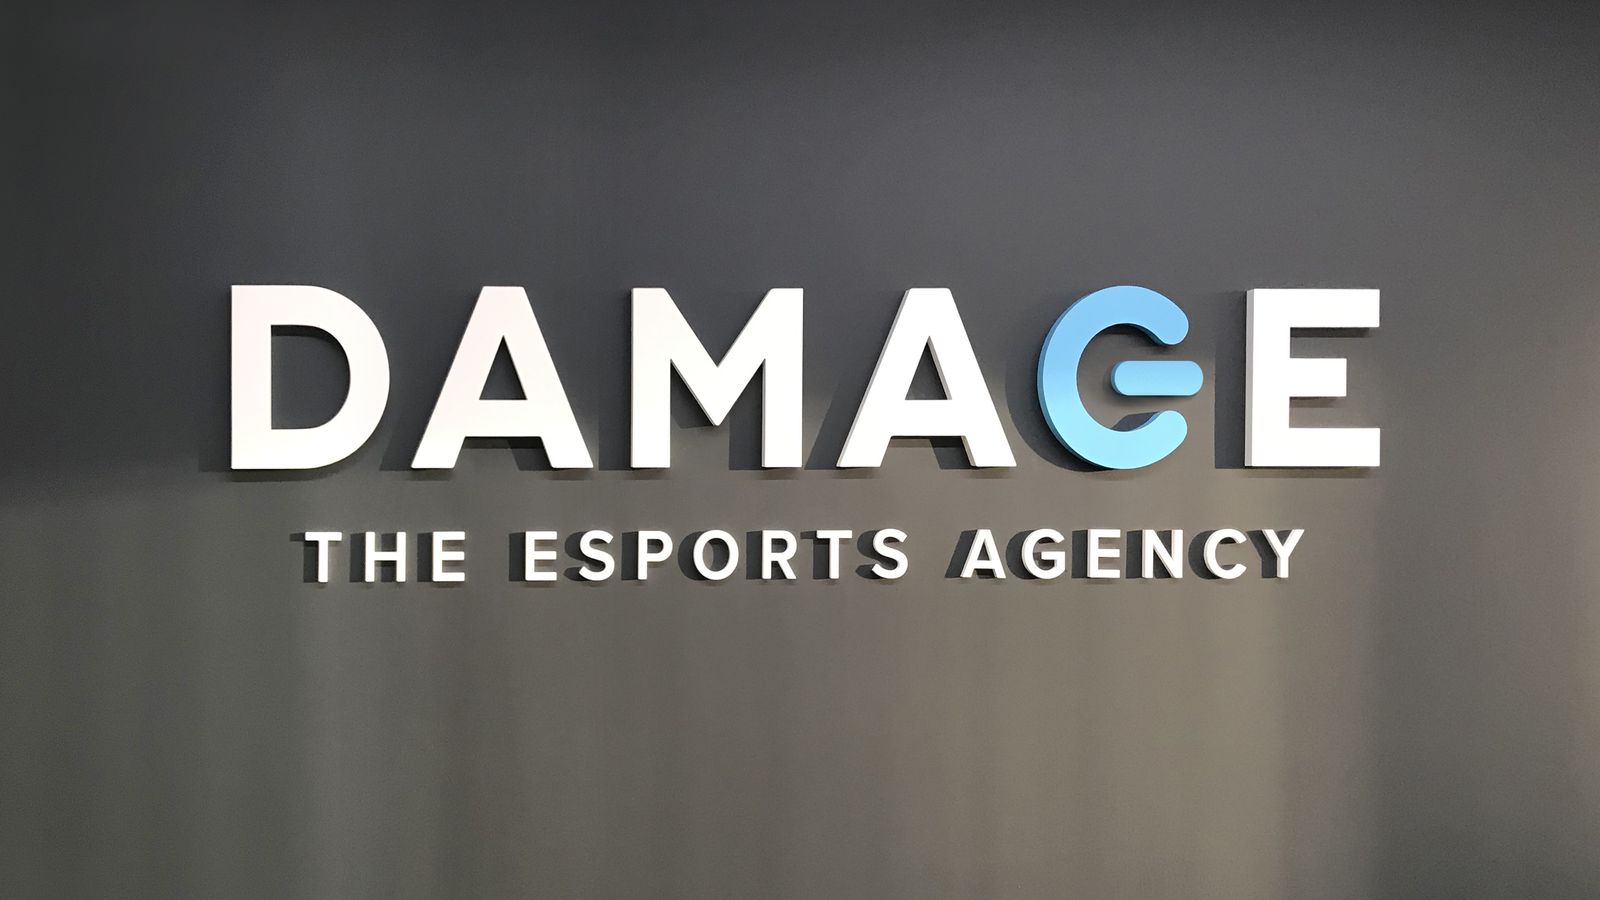 Damage - The Esports Agency 3d acrylic letters wall-mounted for office interior branding